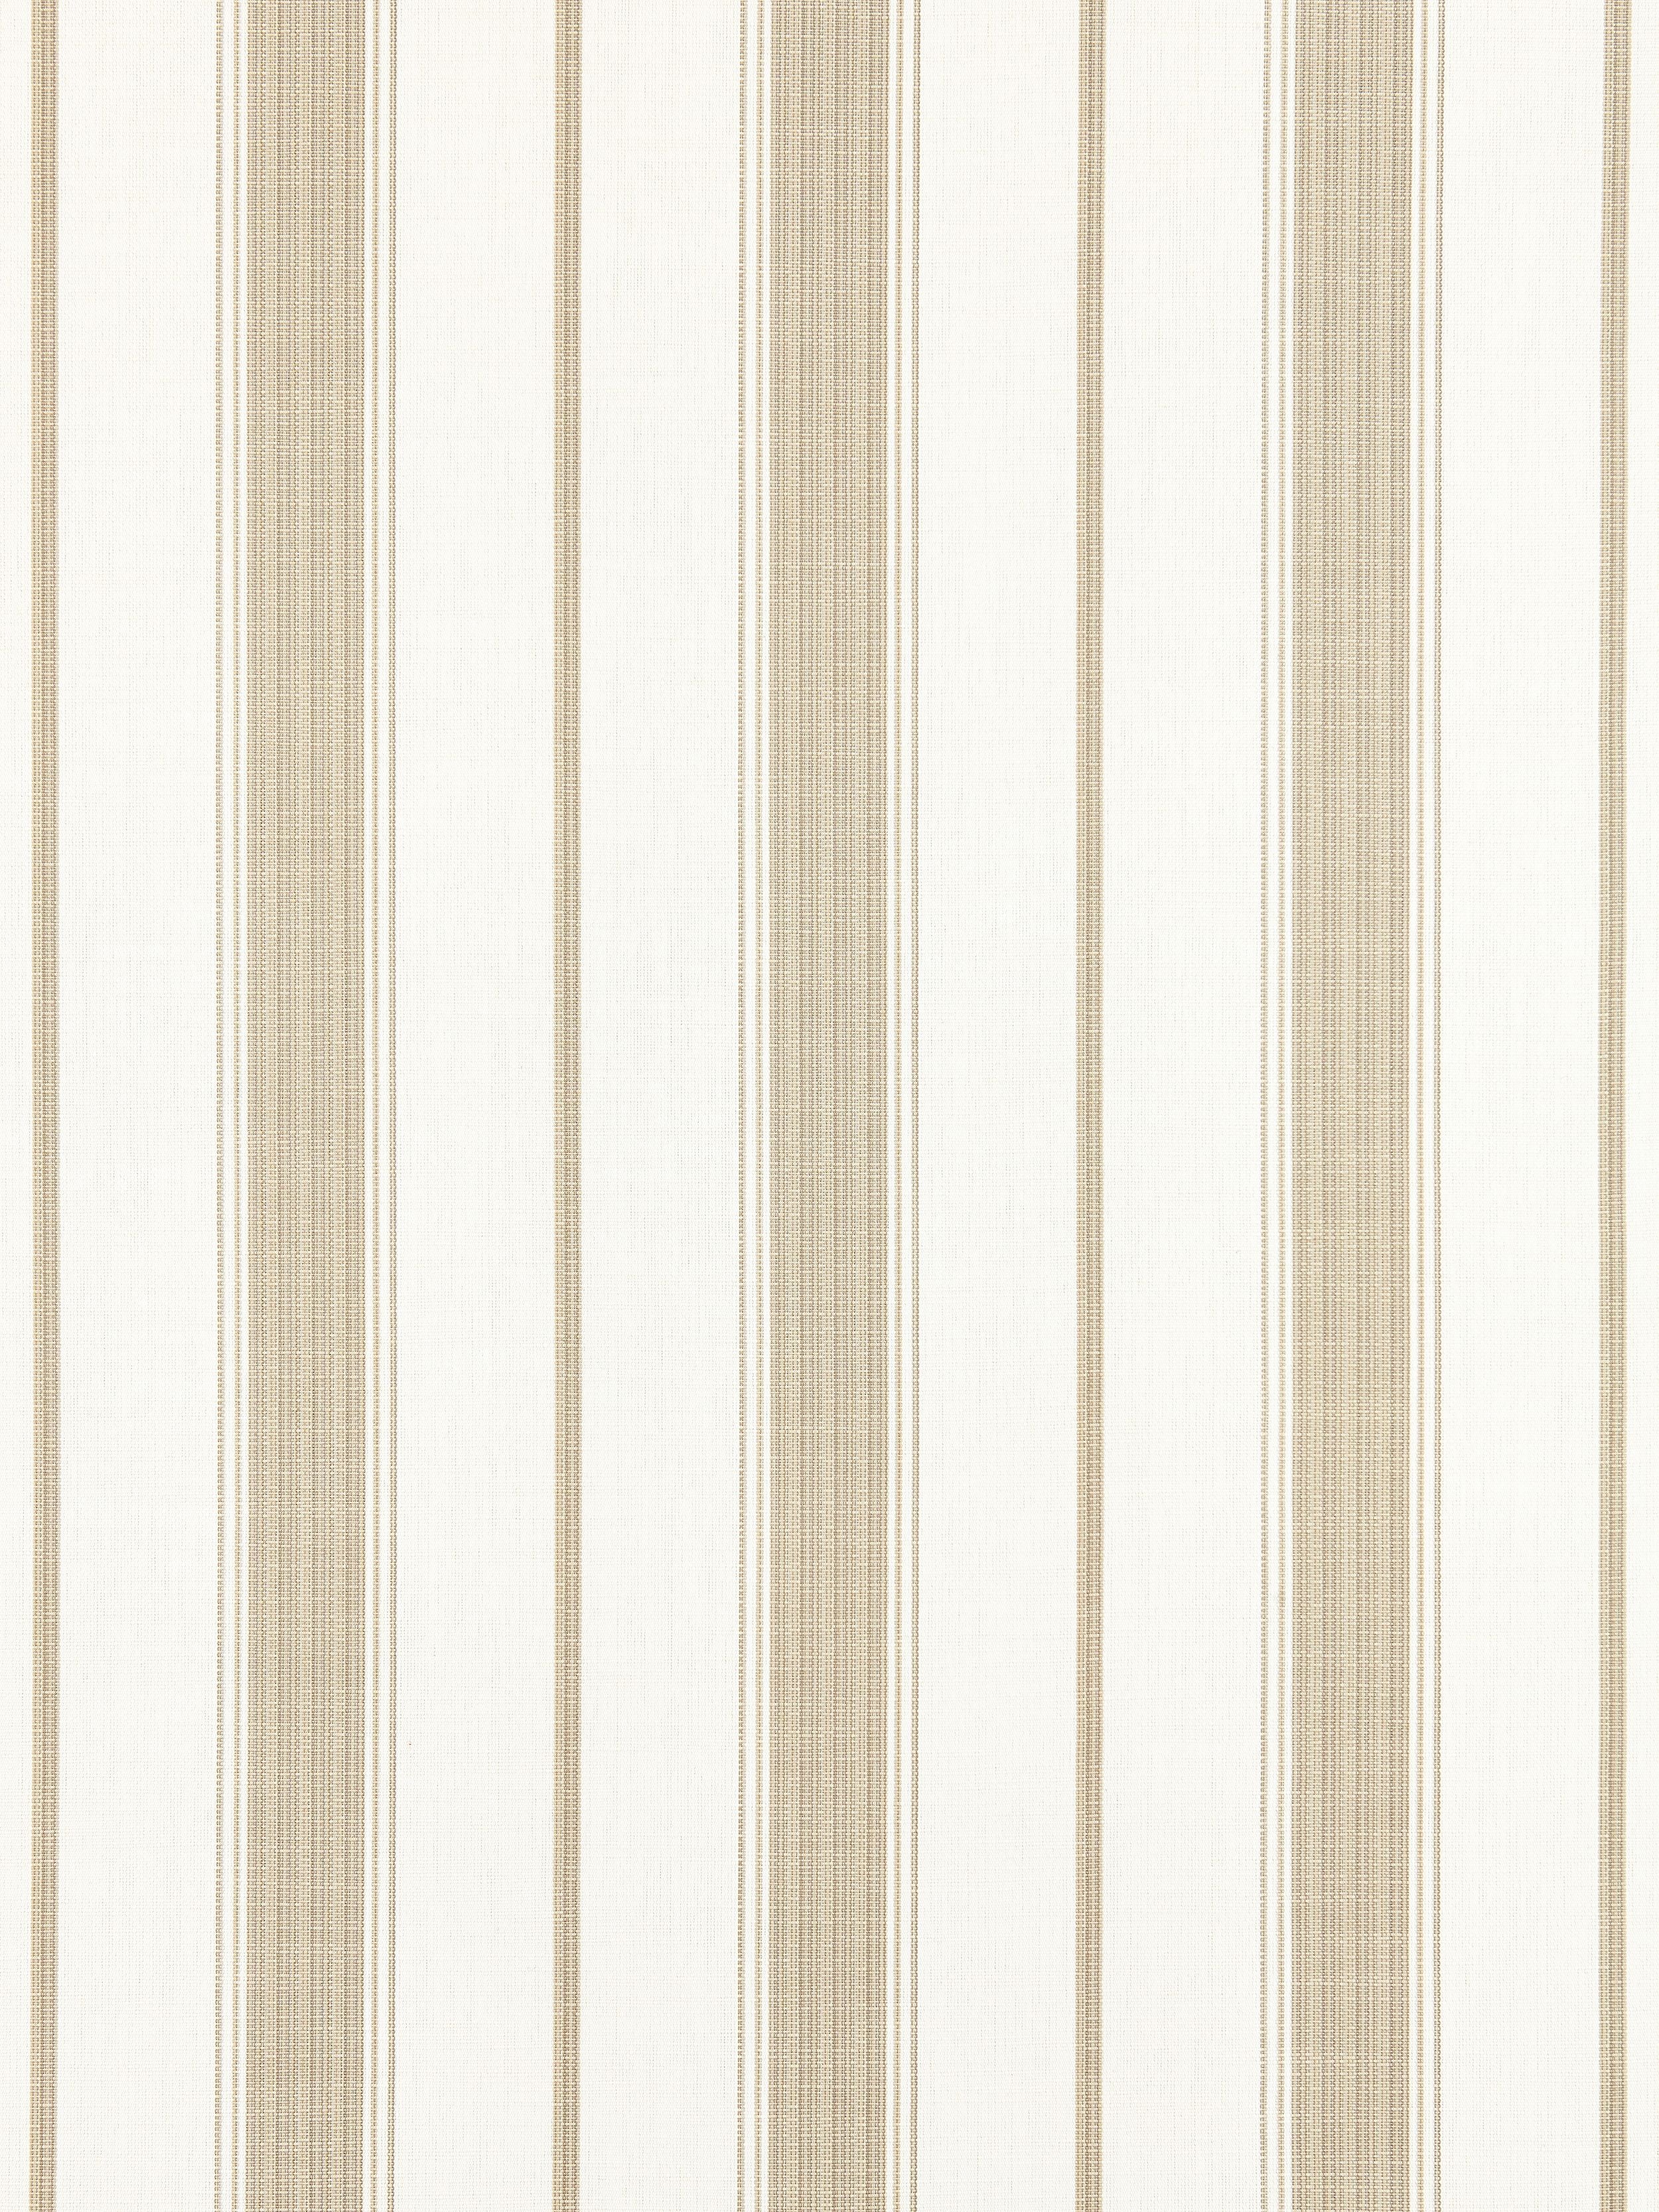 Sconset Stripe fabric in linen color - pattern number SC 000127110 - by Scalamandre in the Scalamandre Fabrics Book 1 collection